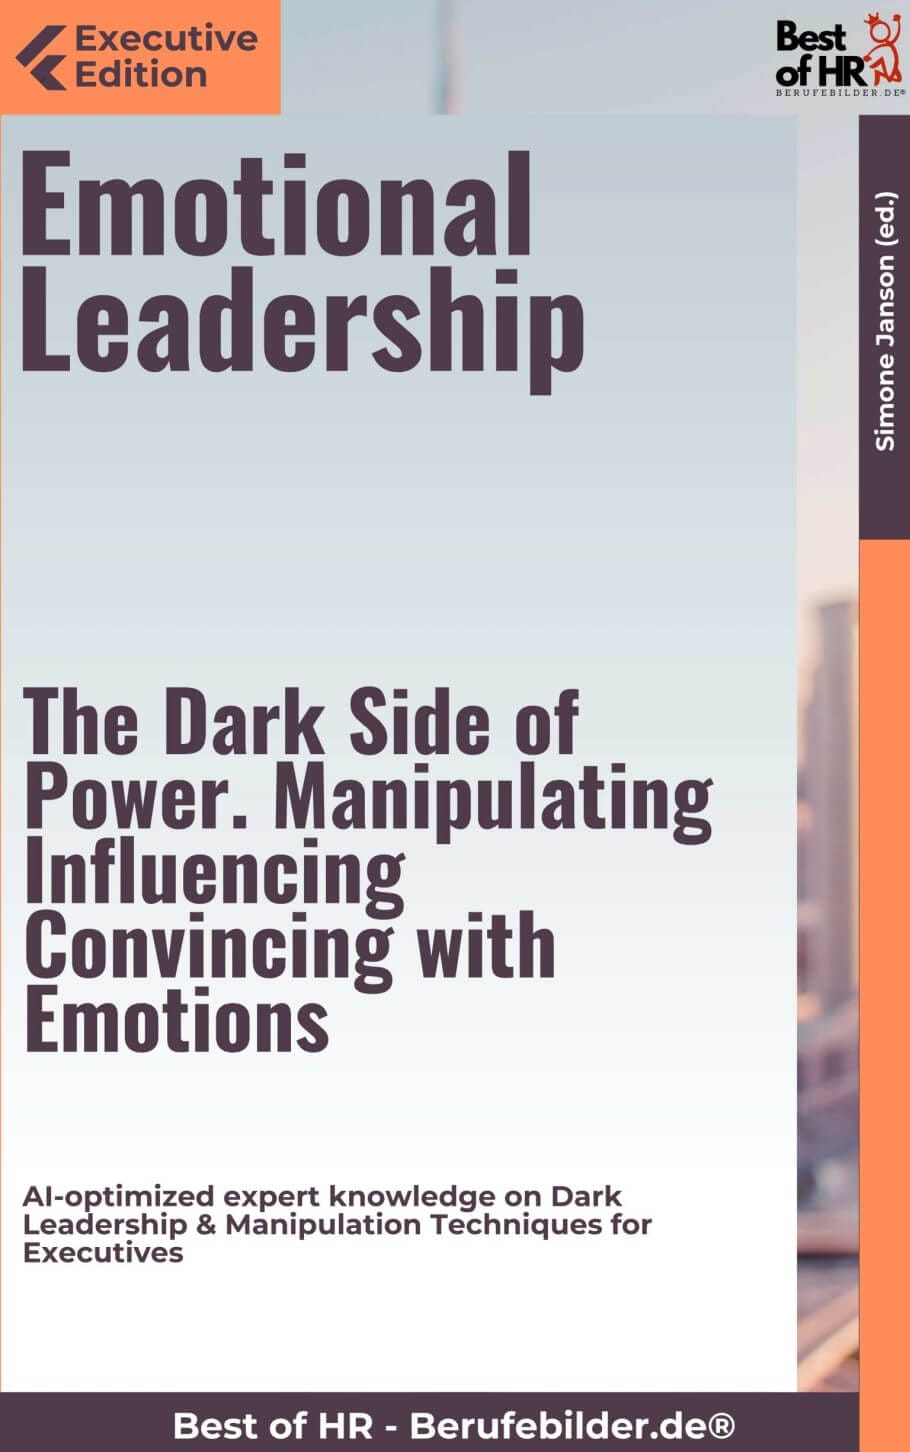 Emotional Leadership – The Dark Side of Power. Manipulating, Influencing, Convincing with Emotions (Engl. Version)